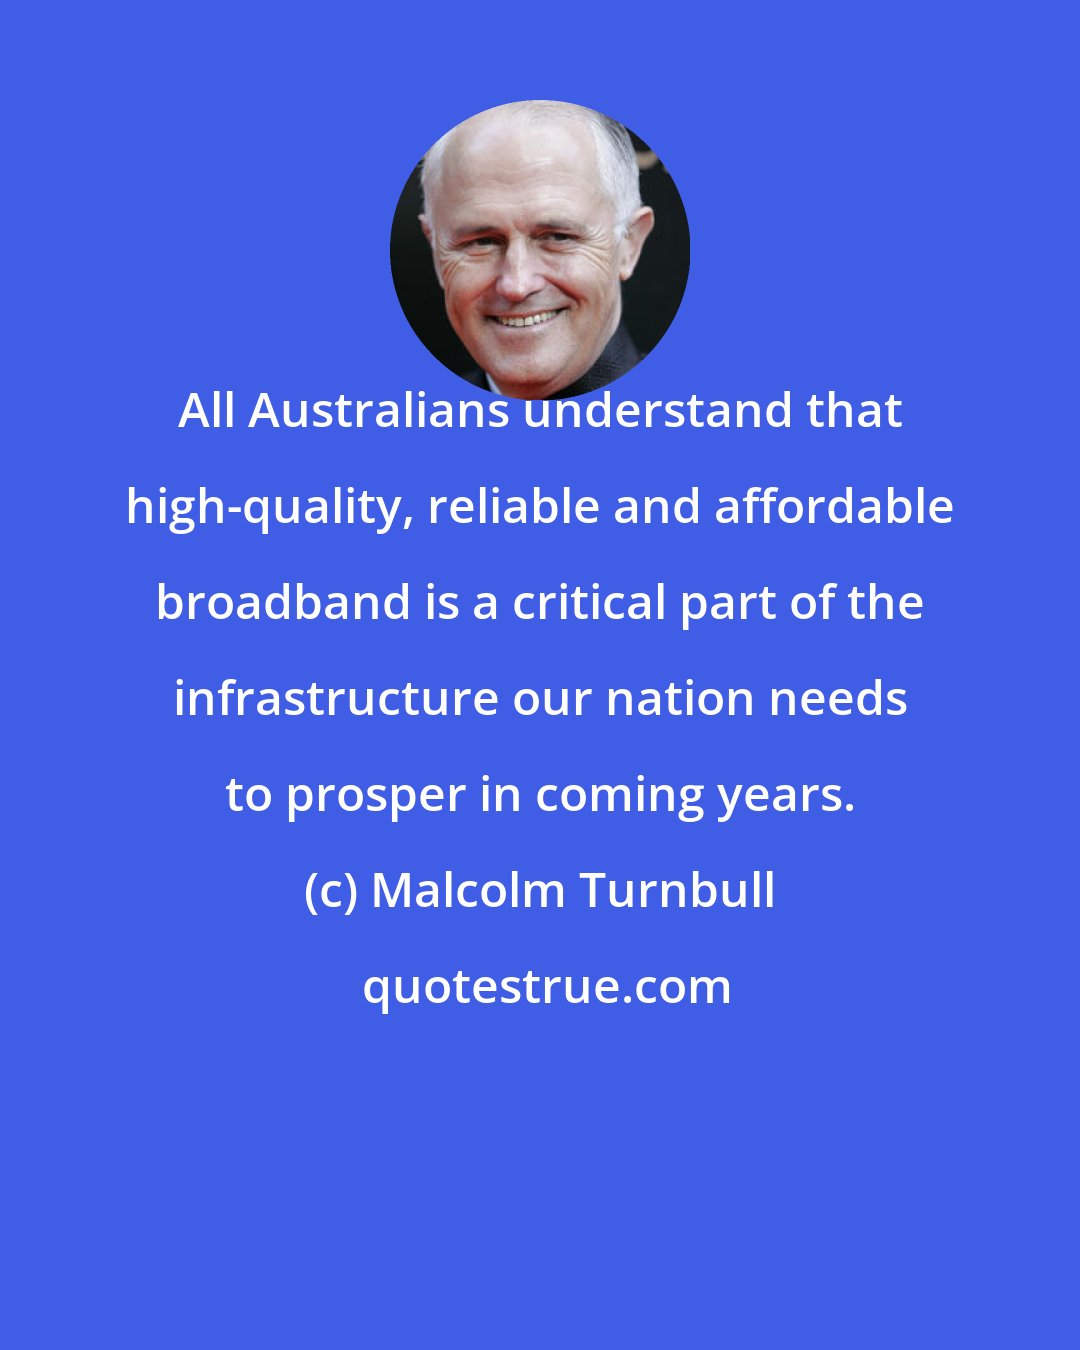 Malcolm Turnbull: All Australians understand that high-quality, reliable and affordable broadband is a critical part of the infrastructure our nation needs to prosper in coming years.